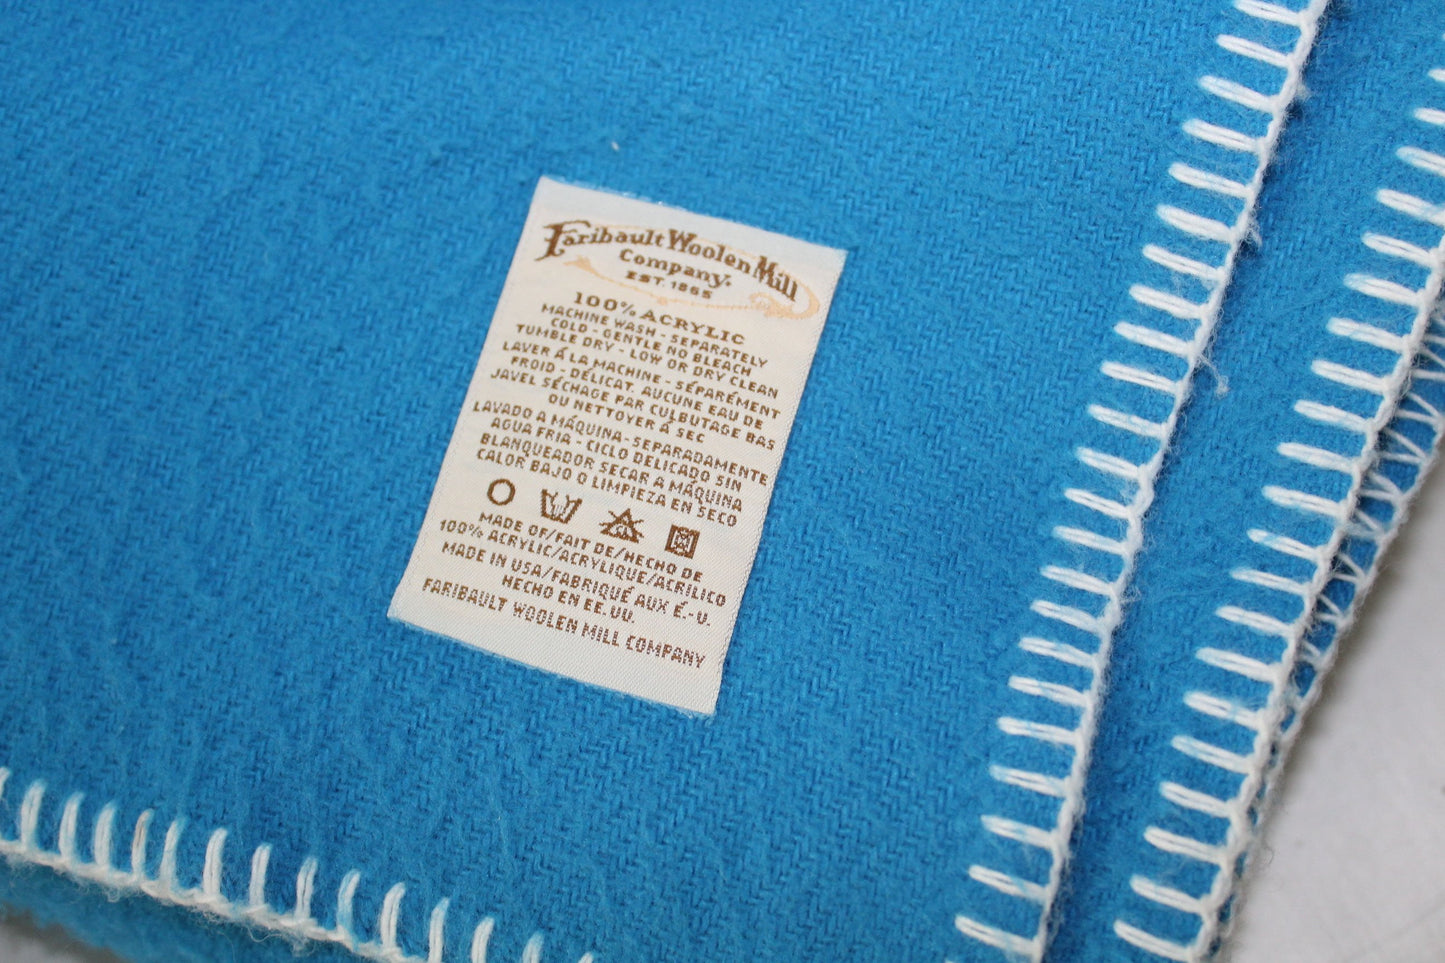 Acrylic Faribo Throw Vintage Nationwide Ins Blanket  Maker's Label